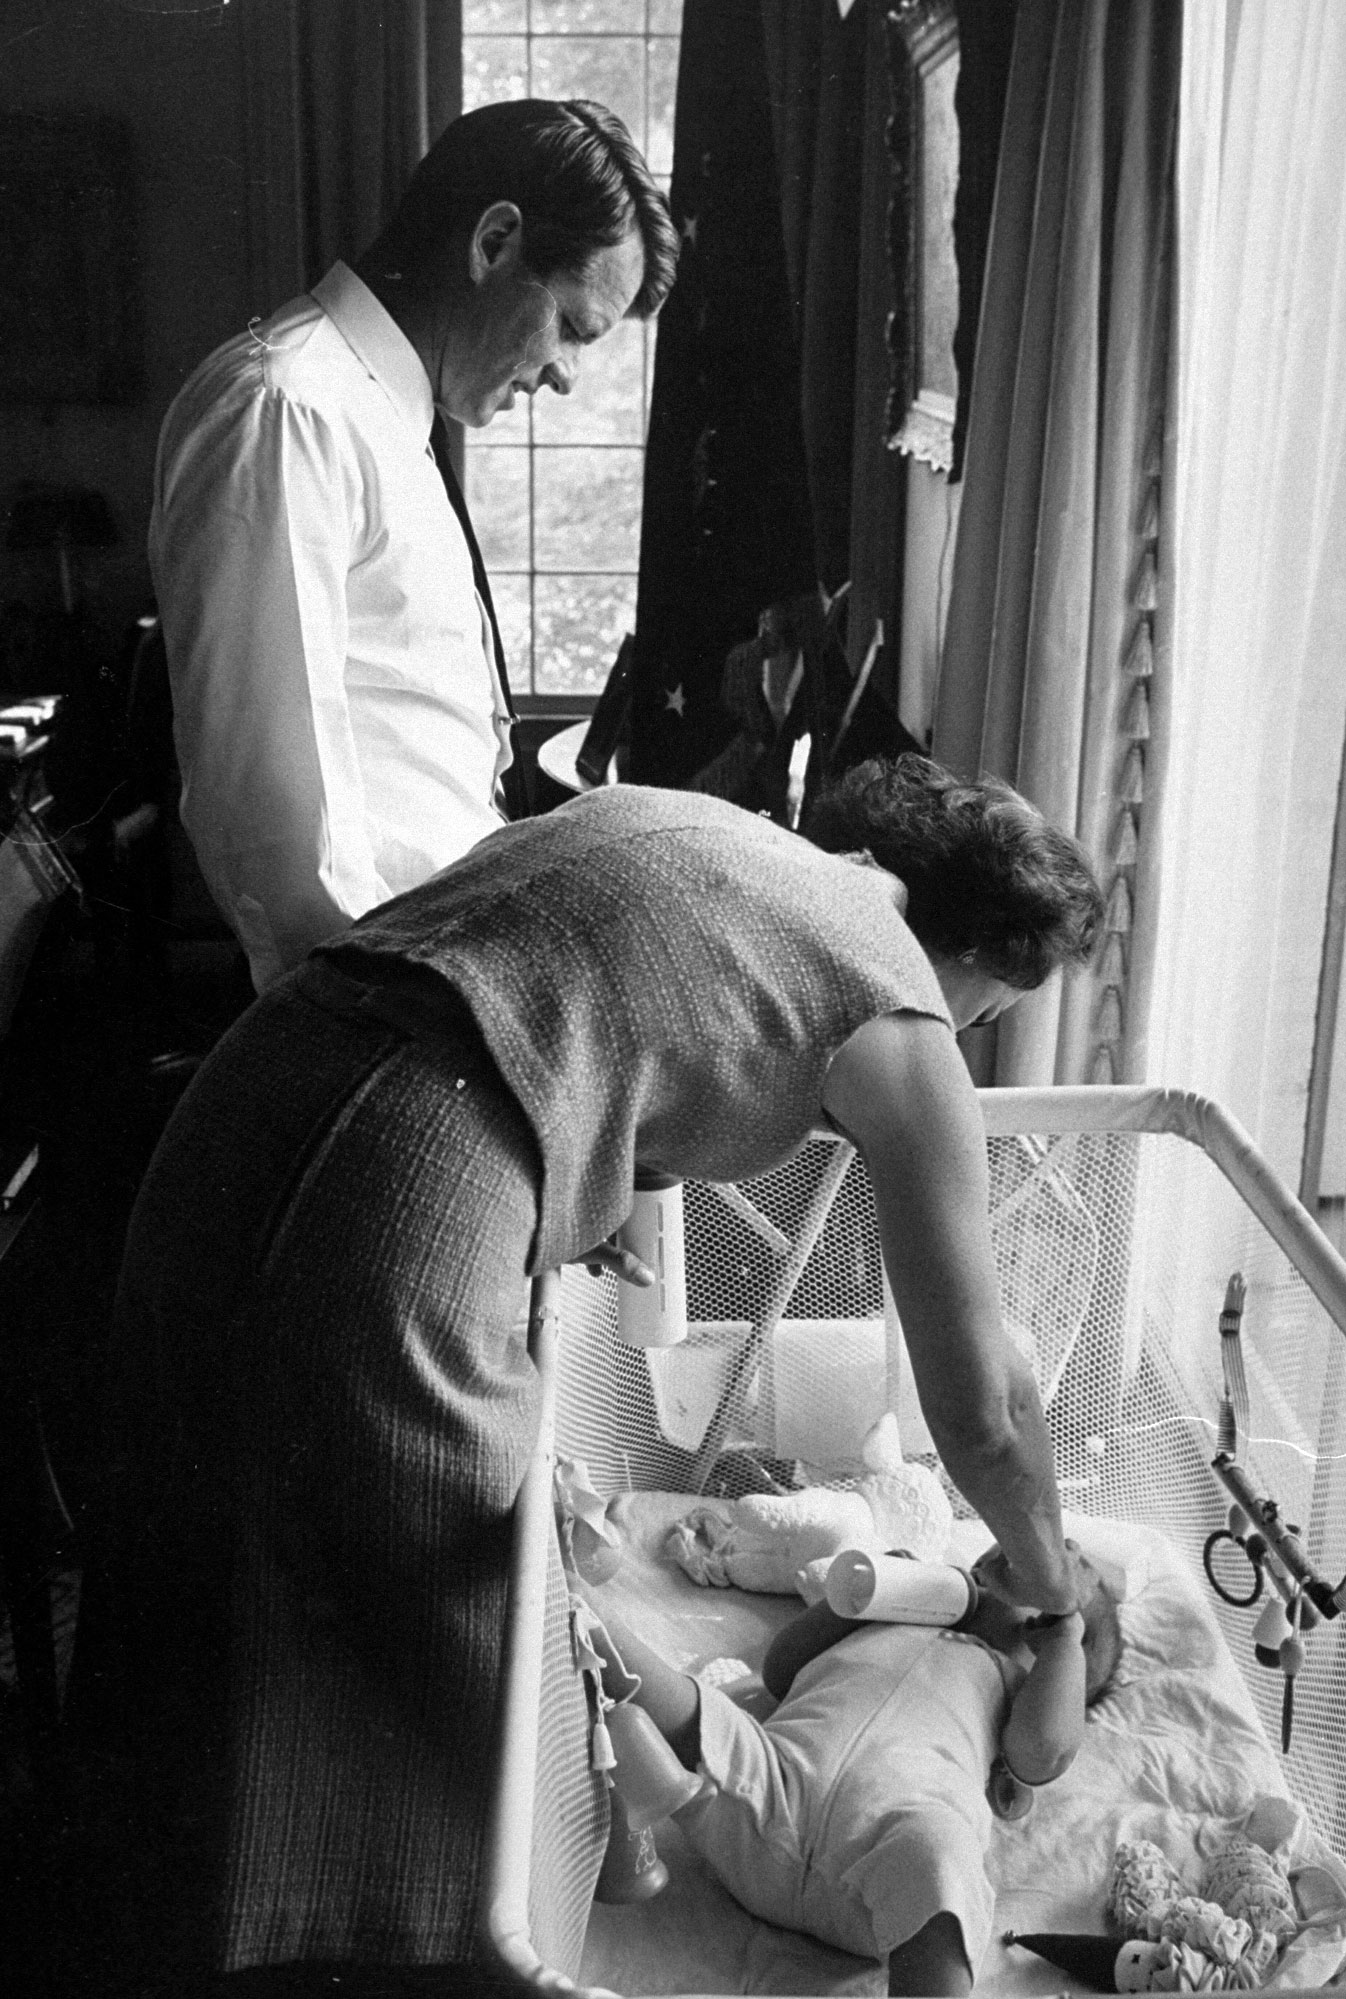 Robert F. Kennedy and his wife Ethel putting their one-year-old son, Christopher, down for a nap, 1964.